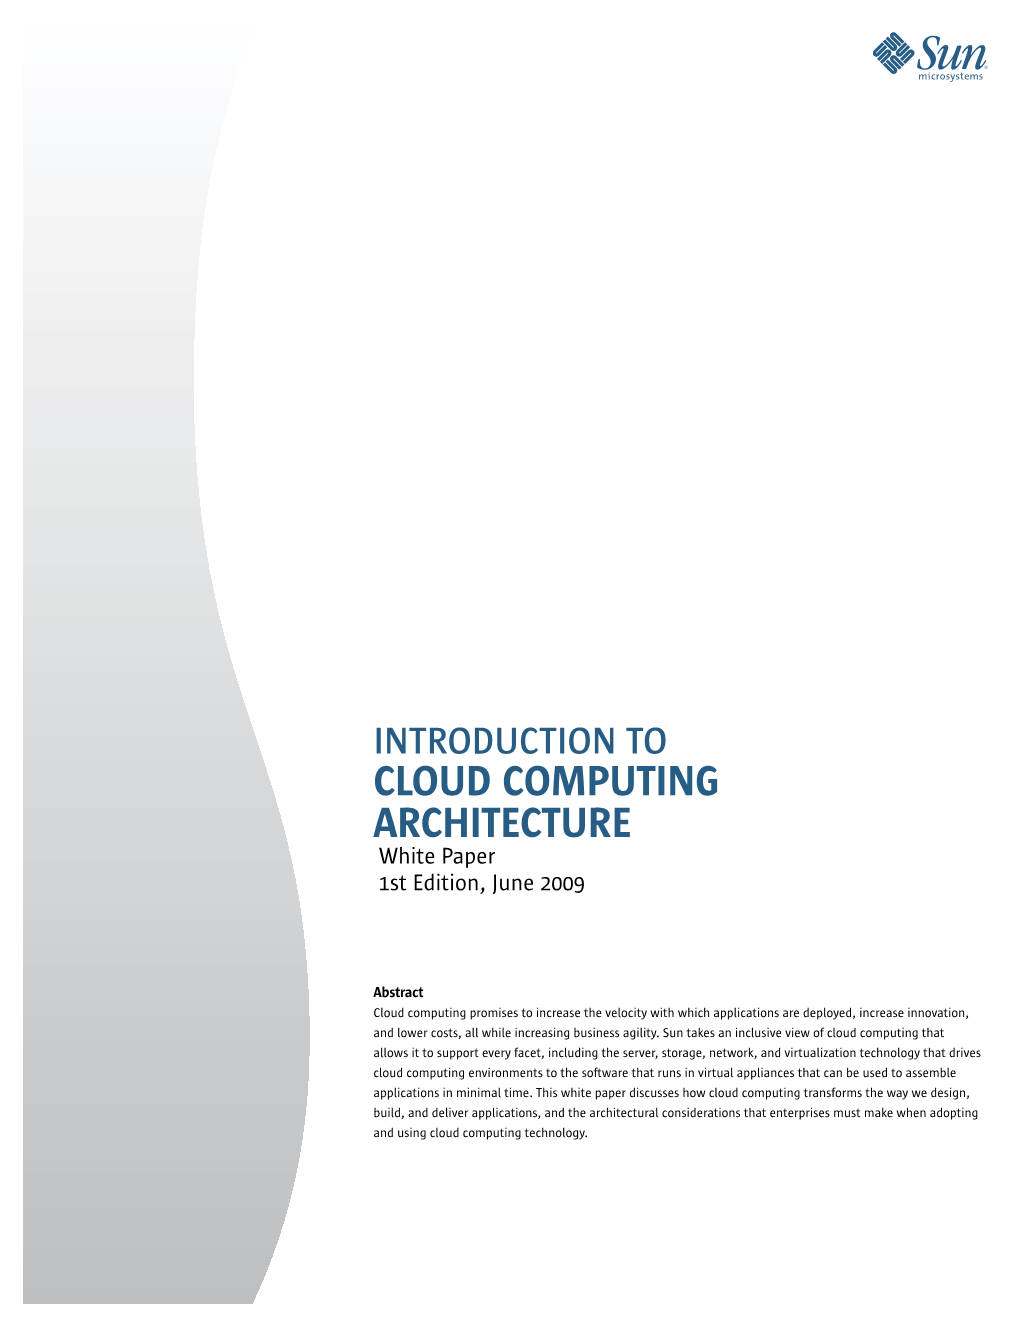 Introduction to Cloud Computing Architecture White Paper 1St Edition, June 2009